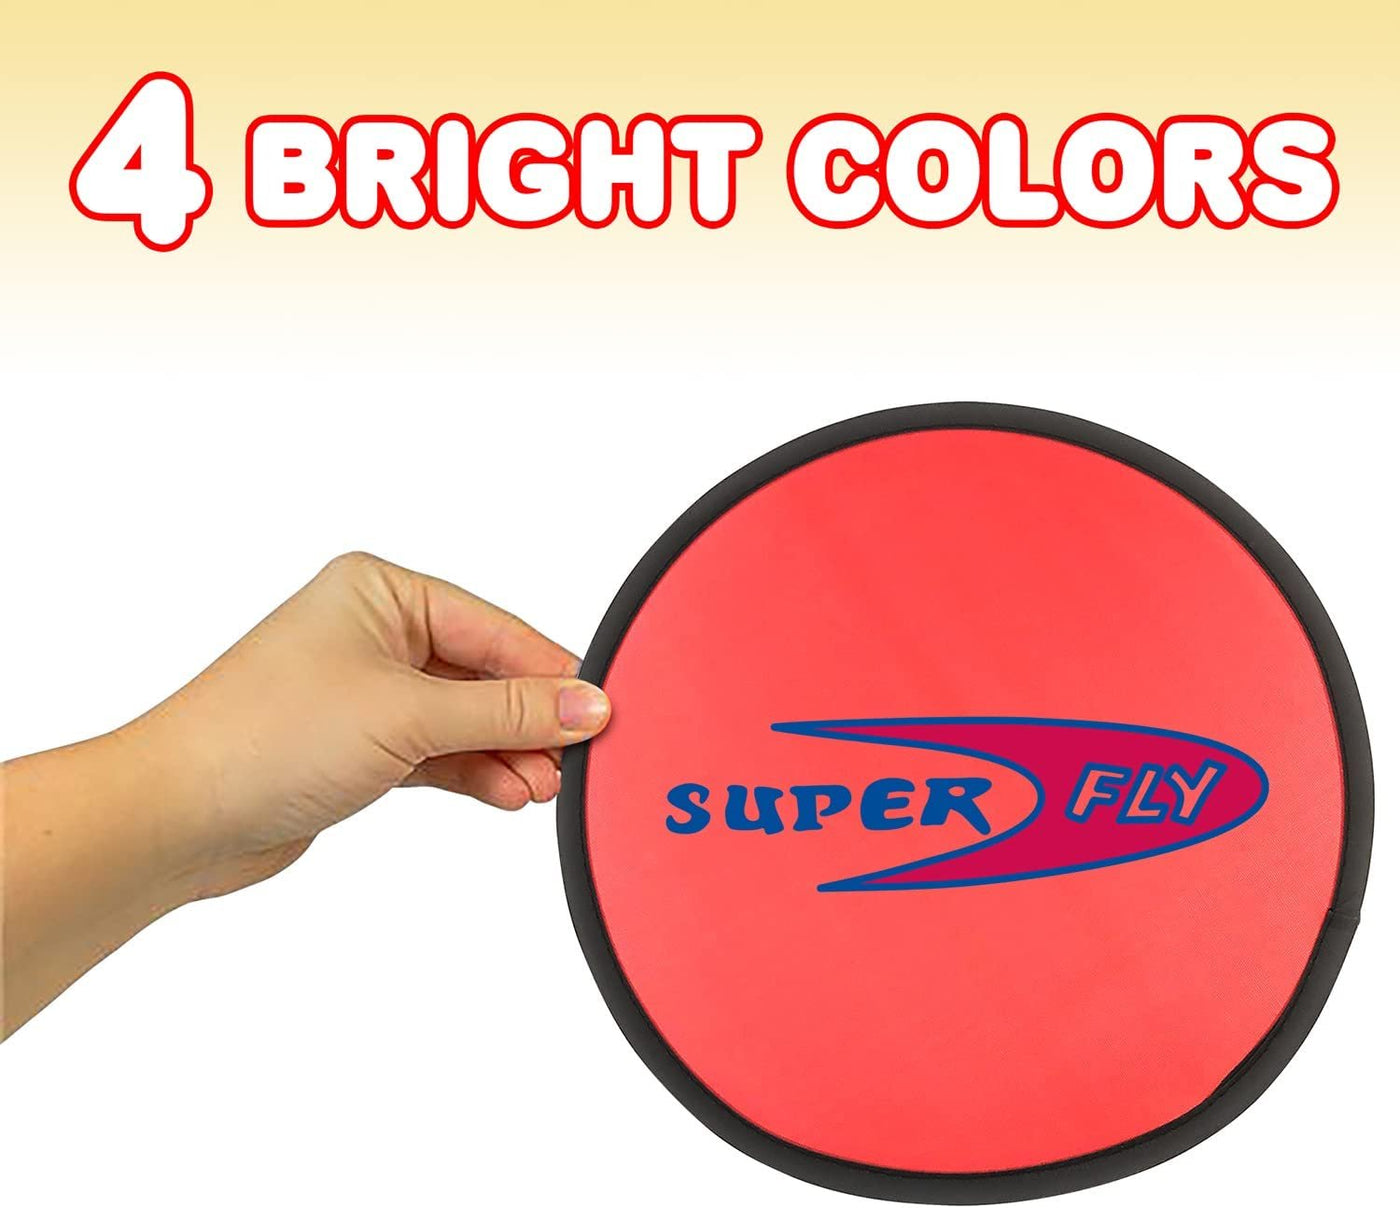 Folding Pocket Frisbee Set - 12 Pack - Foldable Frisbees for Kids and Adults - Colorful Flying Disc Toys - Fun Birthday Party Favors for Boys and Girls - Summer Outdoor Activity Game